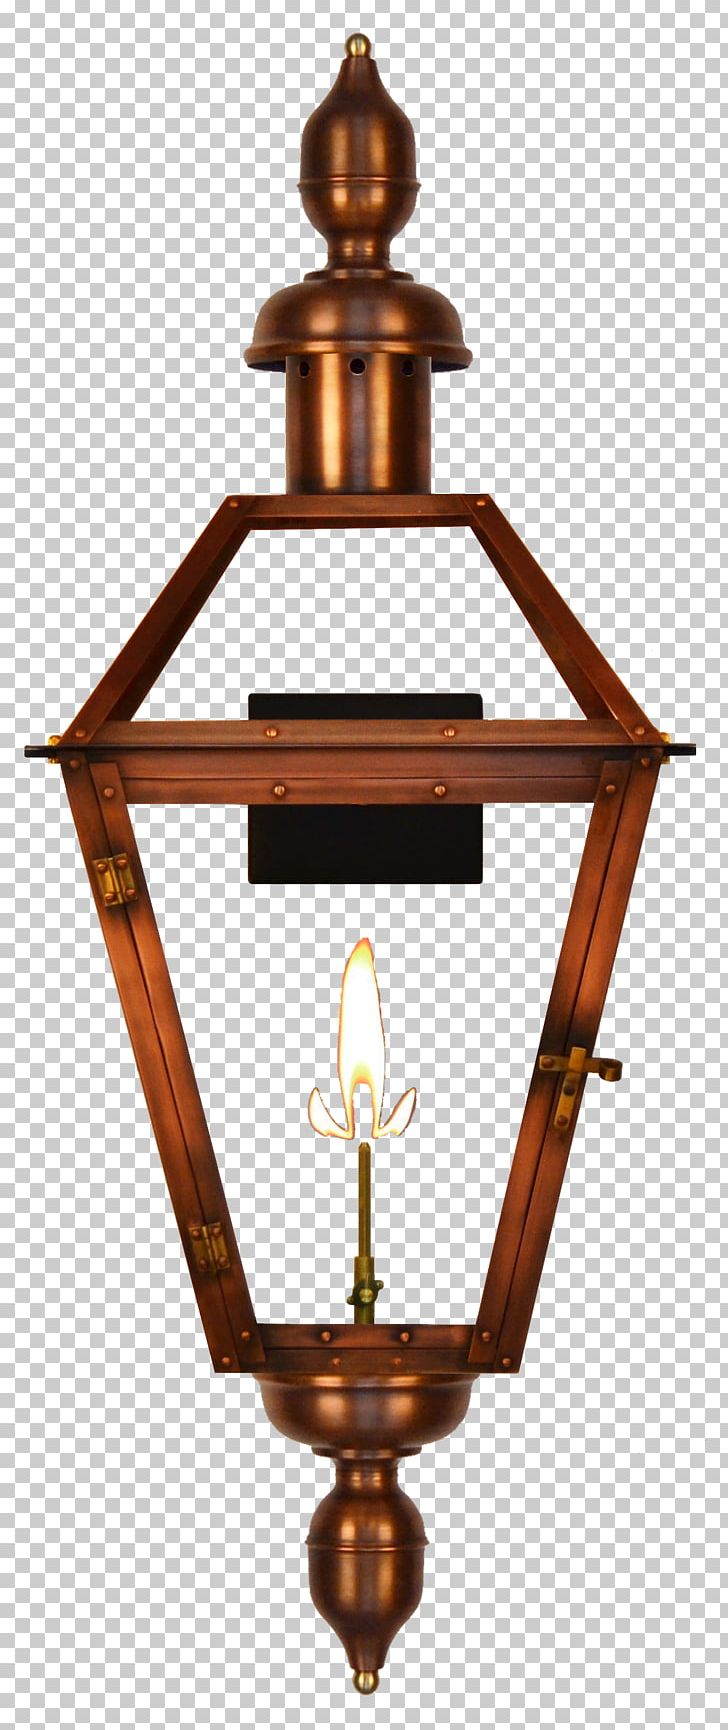 Gas Lighting Coppersmith Lantern Natural Gas PNG, Clipart, Brass, Ceiling Fixture, Copper, Coppersmith, Electric Free PNG Download